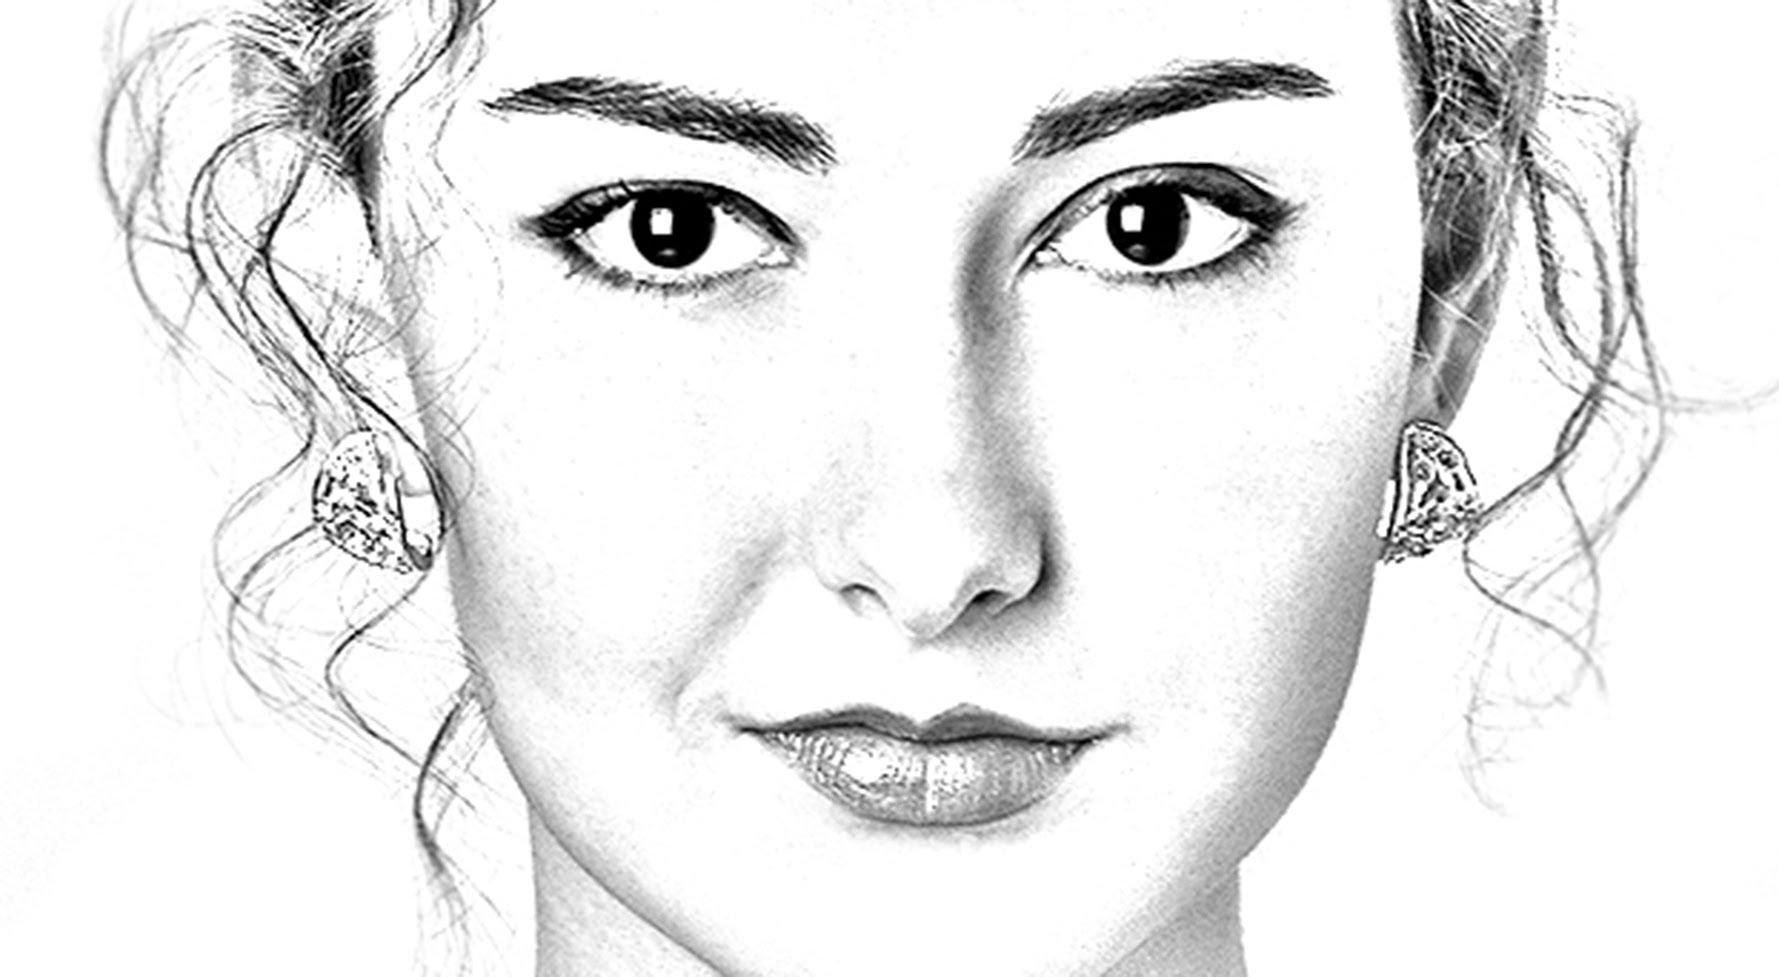 Photoshop Tutorial - Convert Photos into Pencil Drawings by Marty